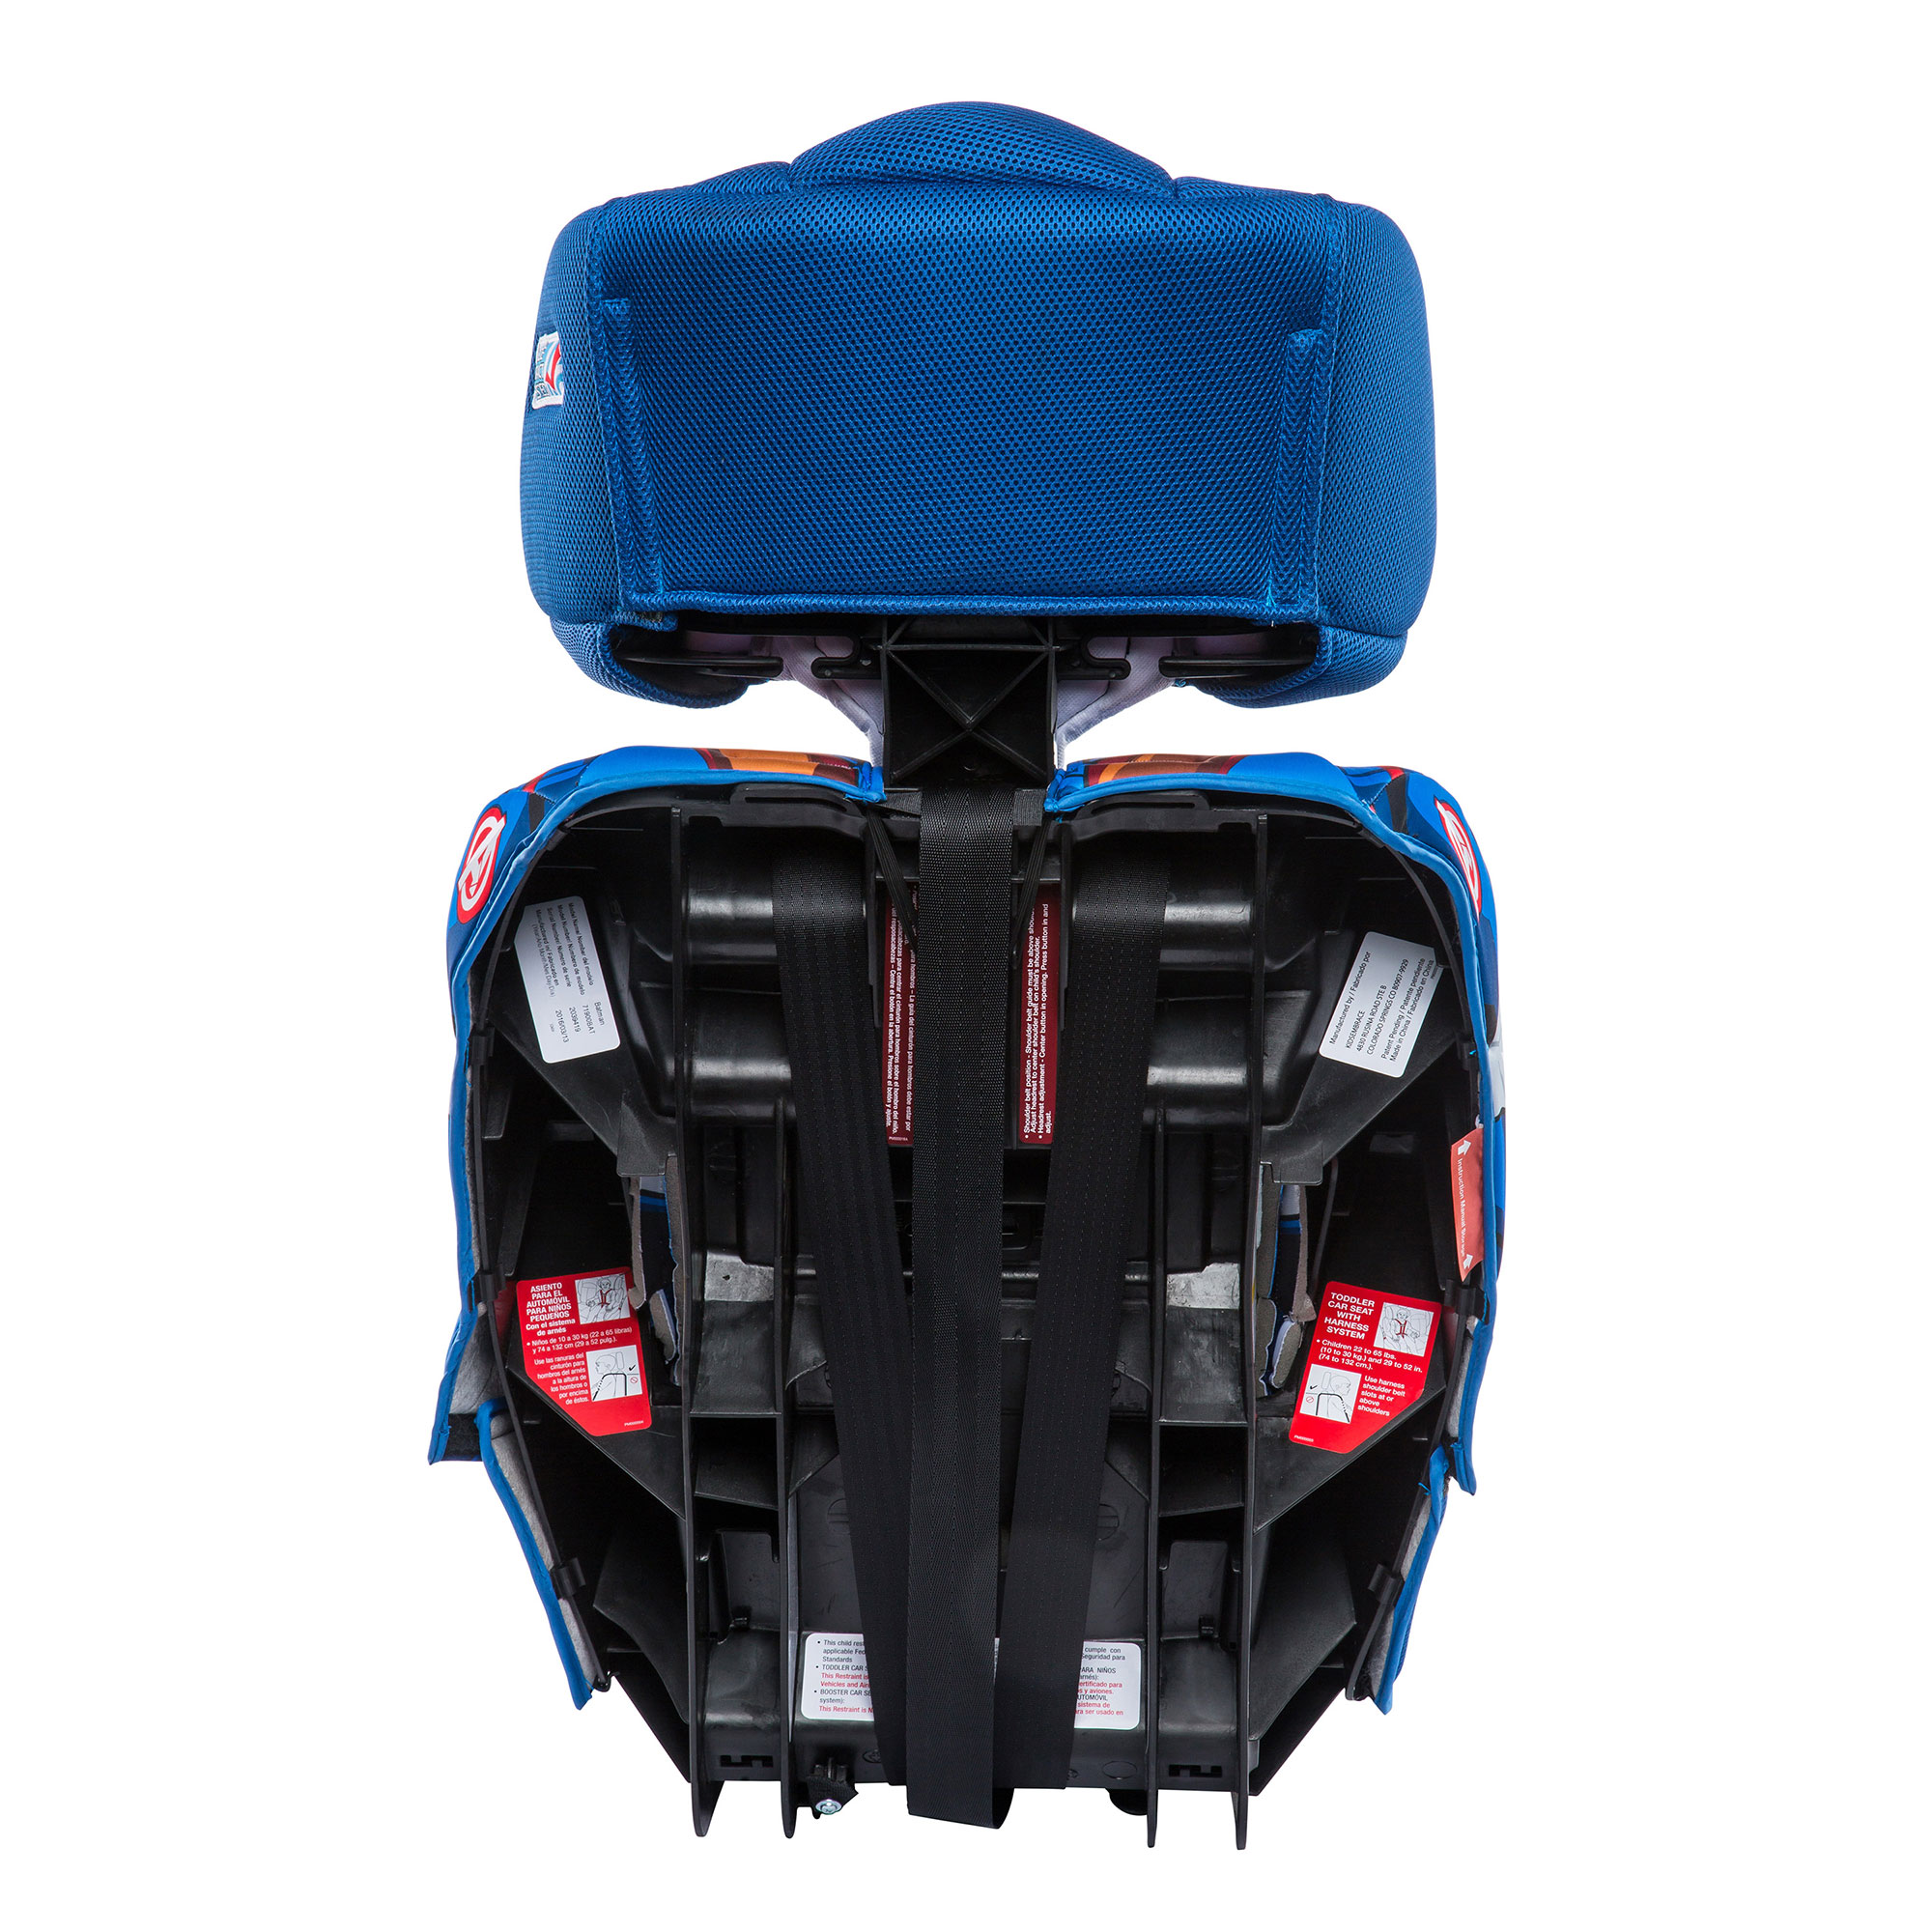 KidsEmbrace Combination Harness Booster Car Seat, Marvel Avengers Captain America - image 5 of 6